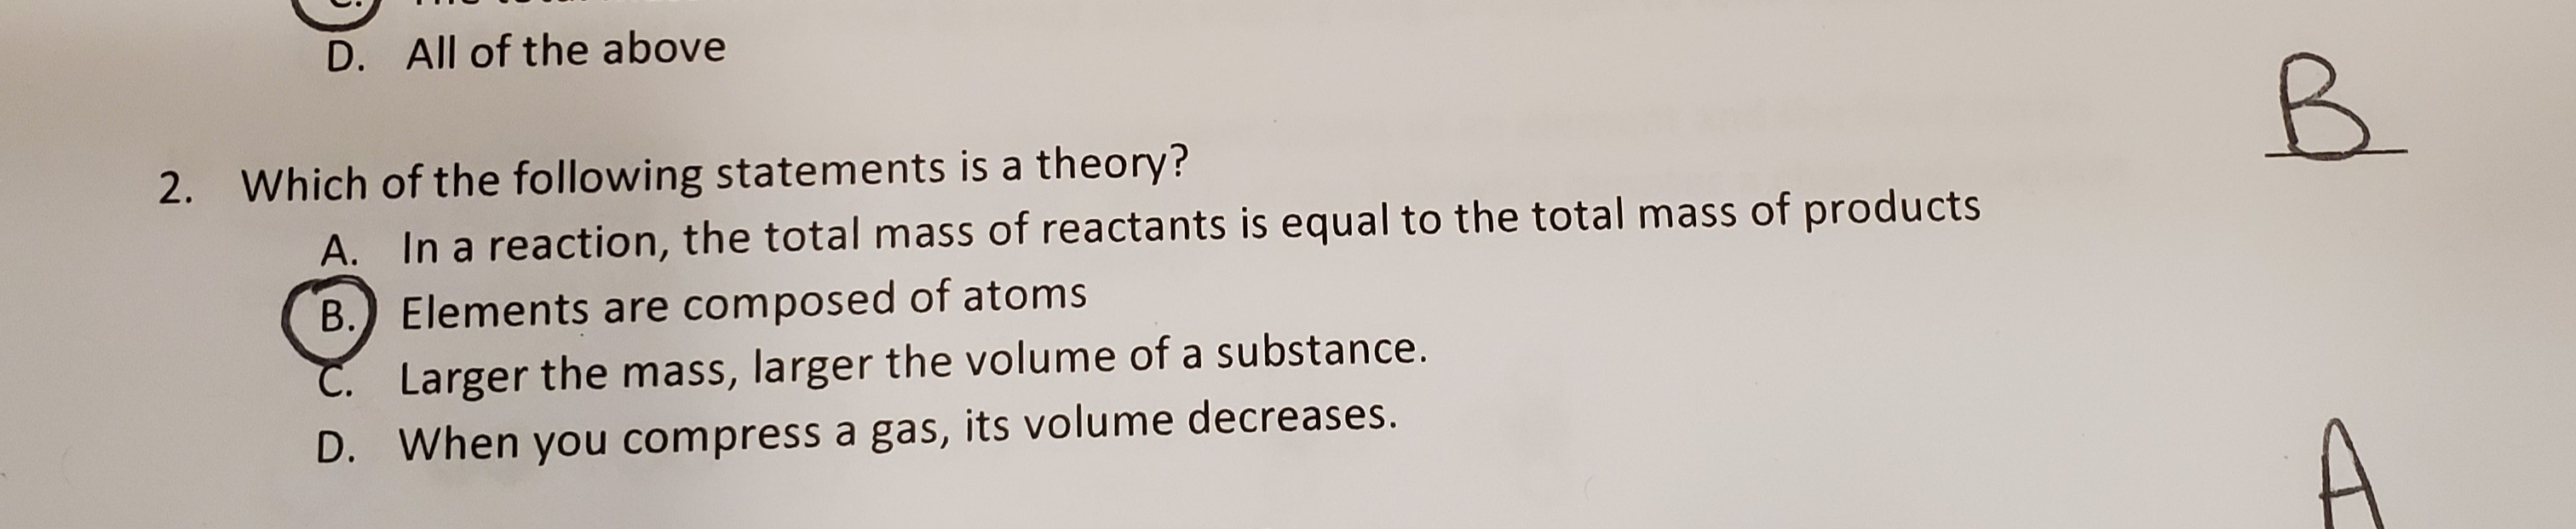 2. Which of the following statements is a theory?
A. In a reaction, the total mass of reactants is equal to the total mass of products
B. Elements are composed of atoms
C. Larger the mass, larger the volume of a substance.
D. When you compress a gas, its volume decreases.
